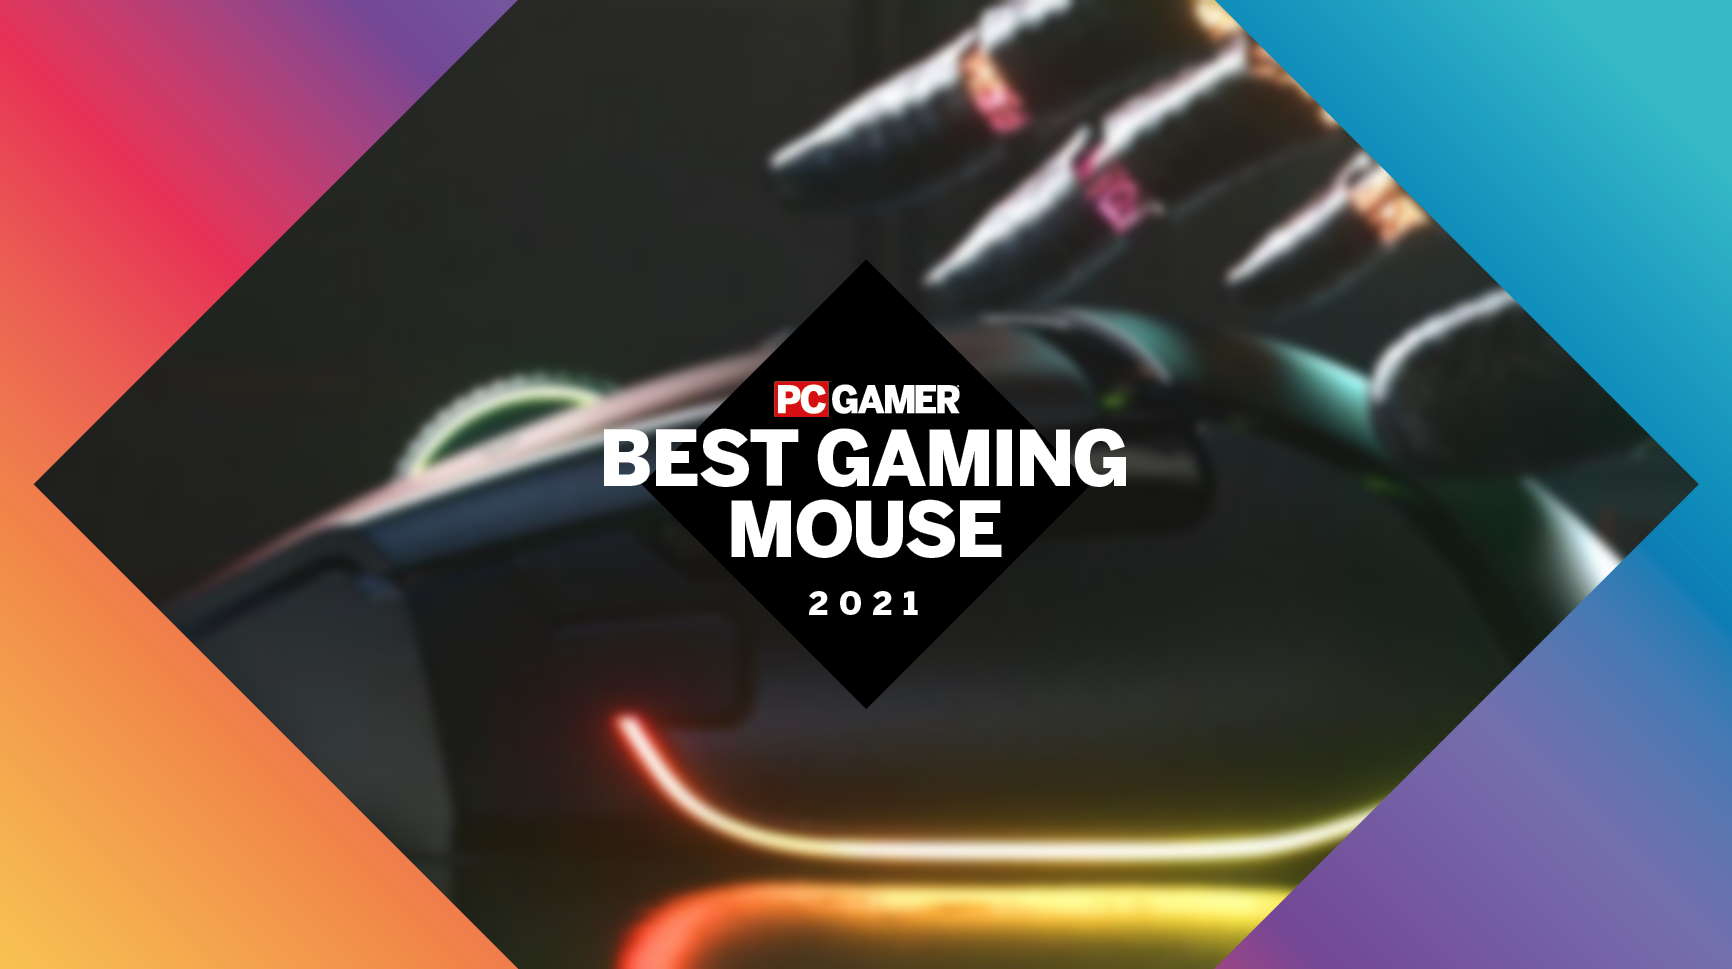  PC Gamer Hardware Awards: What is the best gaming mouse of 2021? 